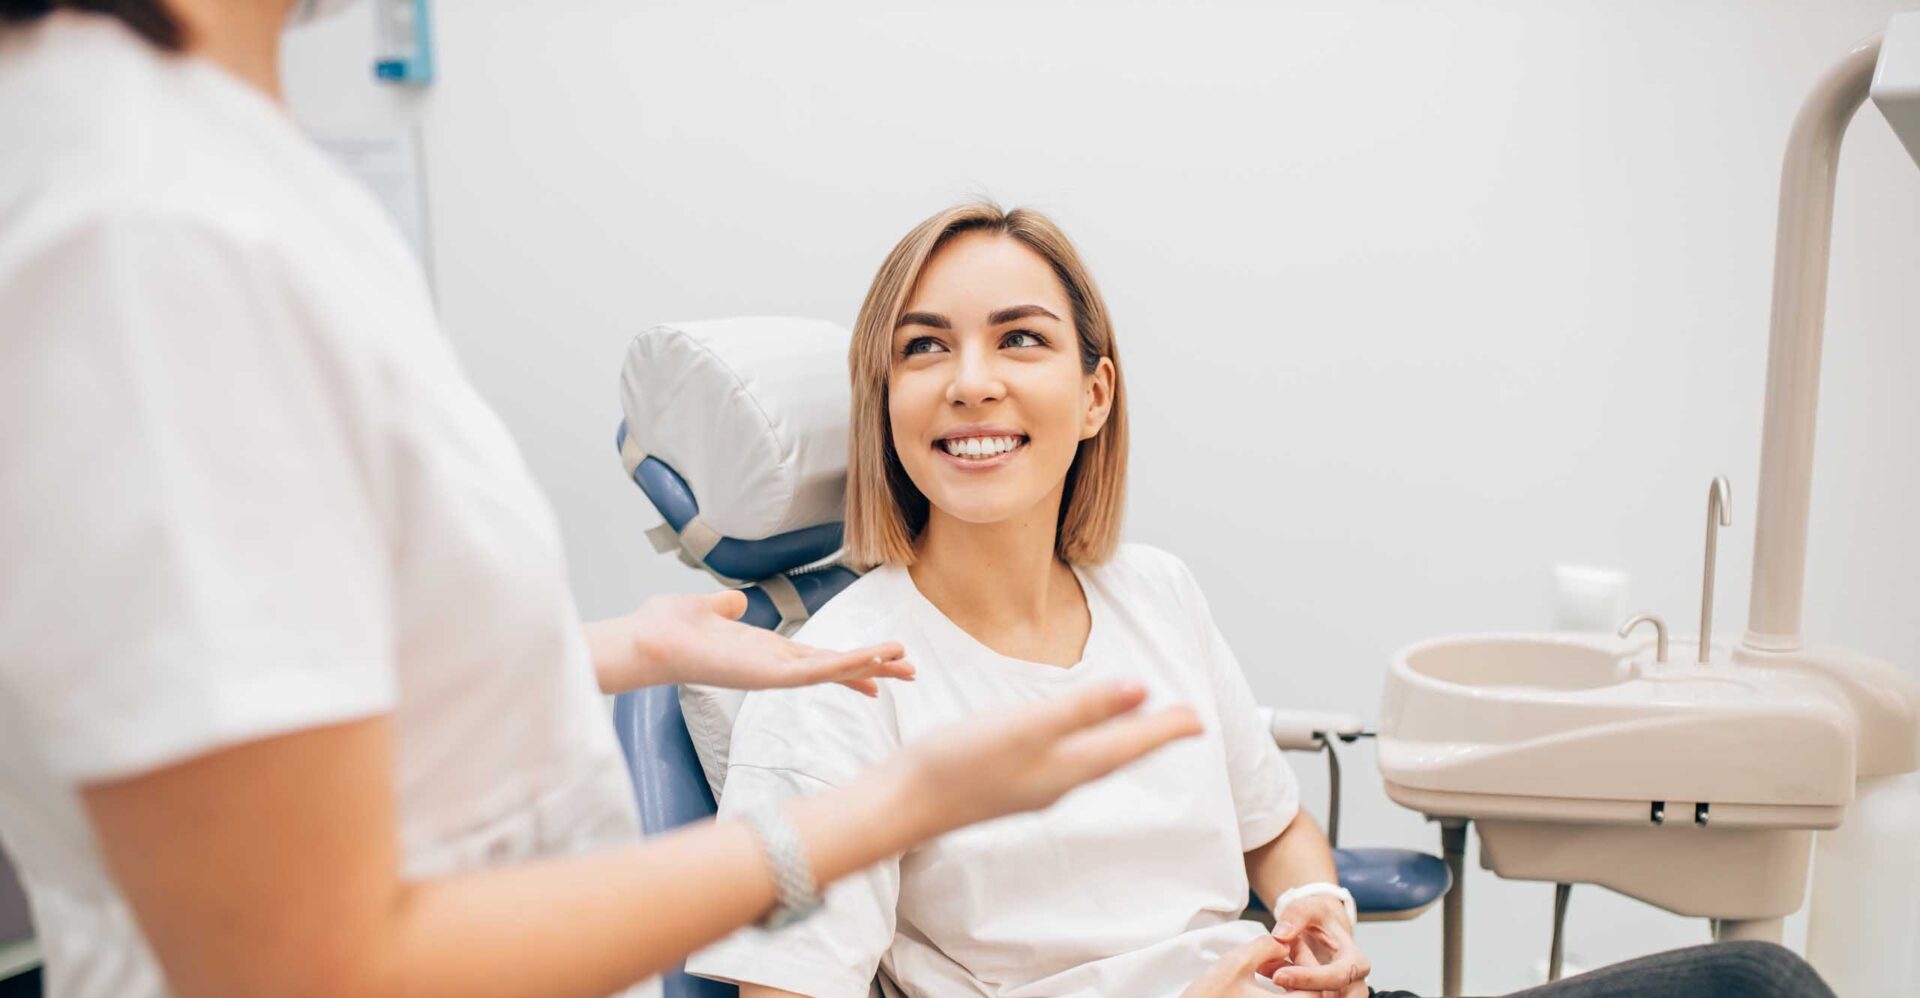 A young woman with short hair smiles up at her dentist as she explains something to her